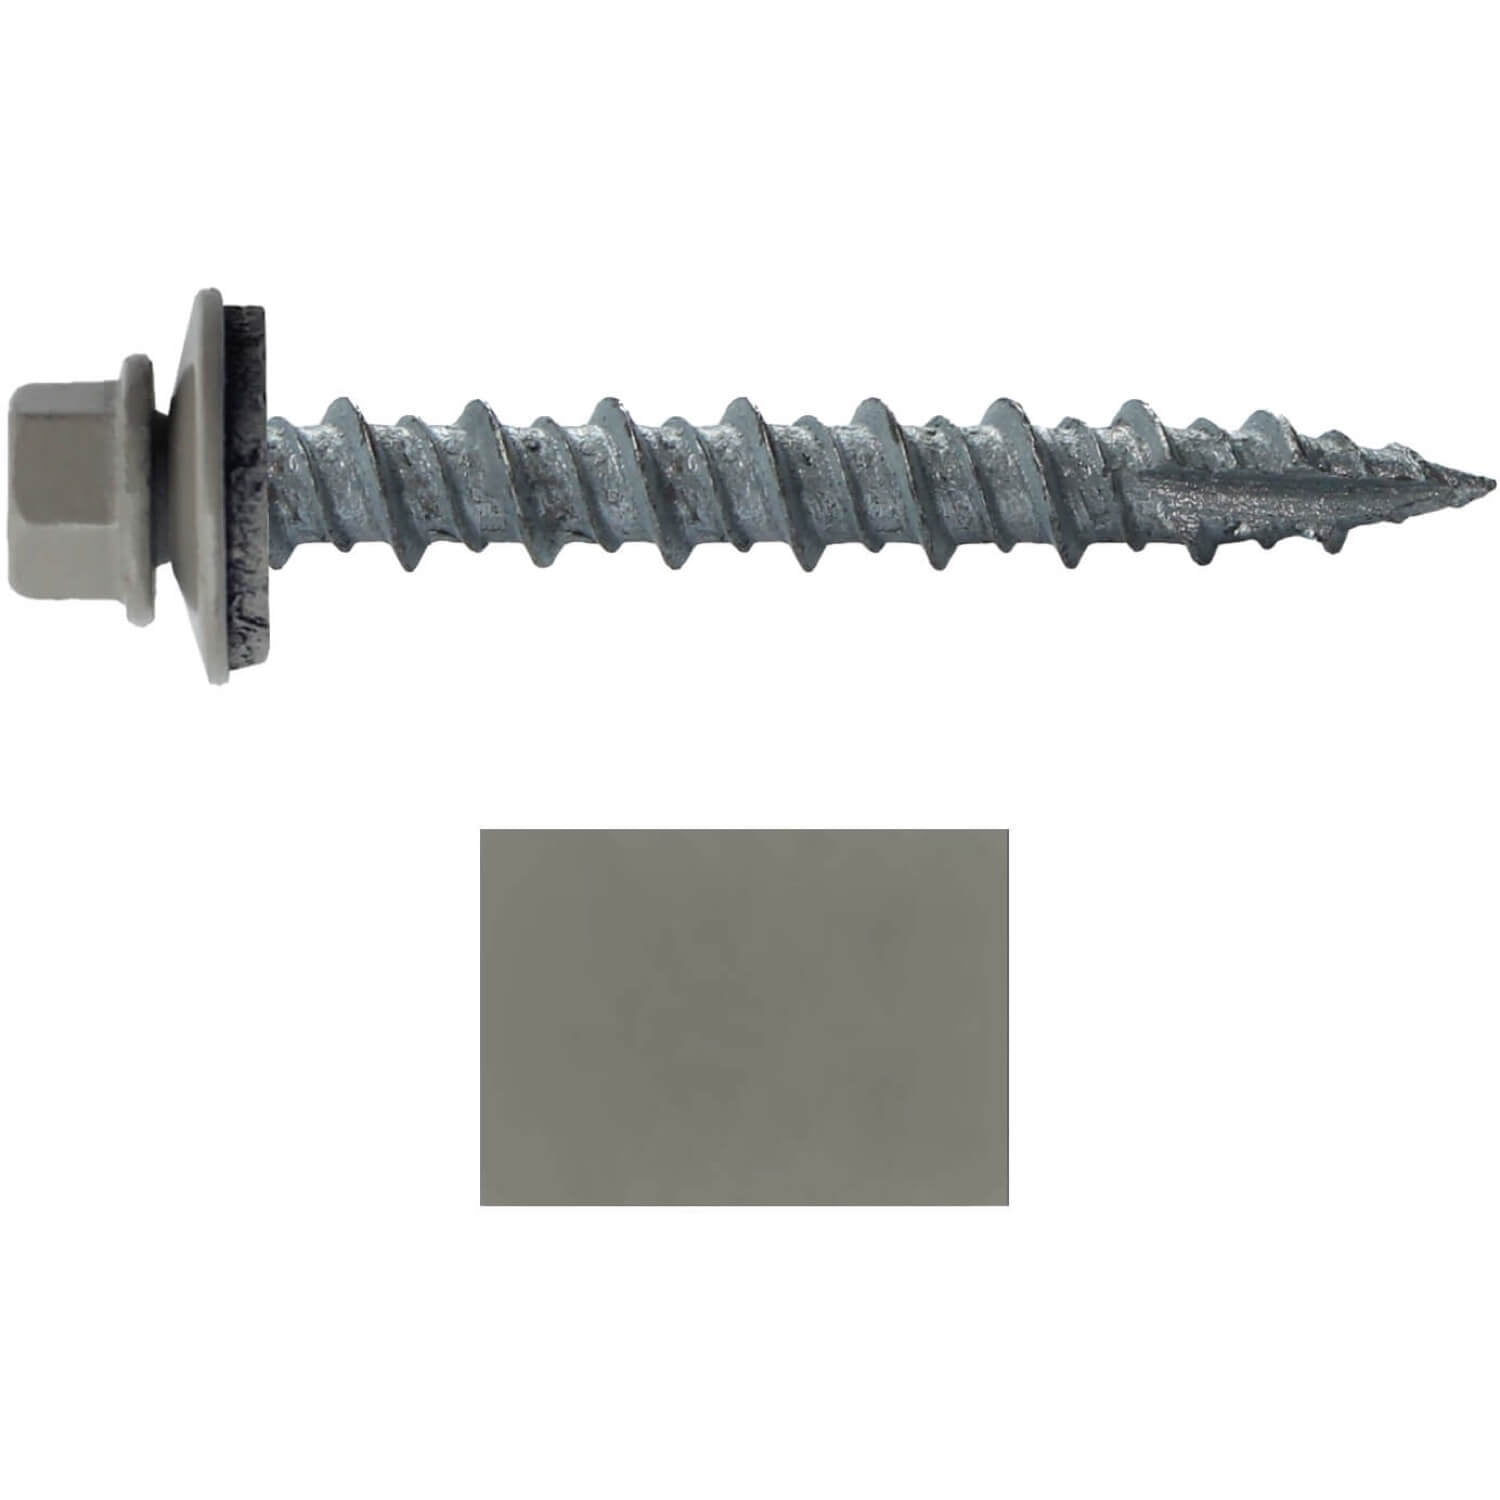 Details about   250 Blue ATLAS #10 x 2-1/2 Pole Barn Roofing metal to wood screws 2.5 inch 